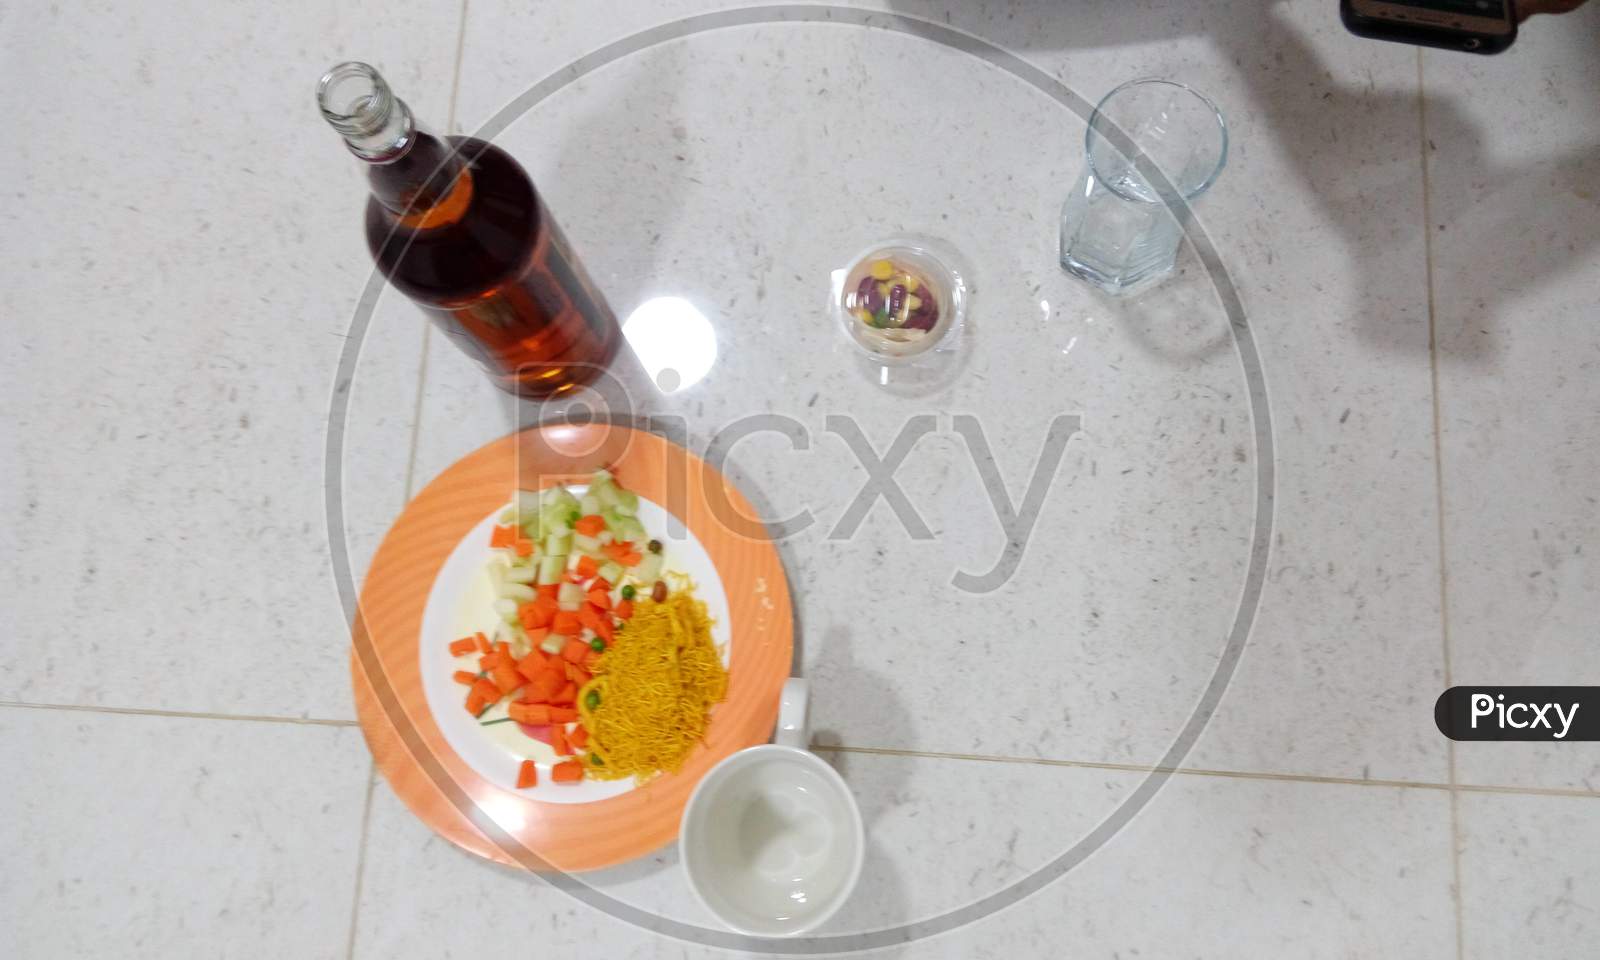 Birthday Celebration Of Liquor With Sufficient Snacks In The Weekend With Friends Room Or House At Middle East